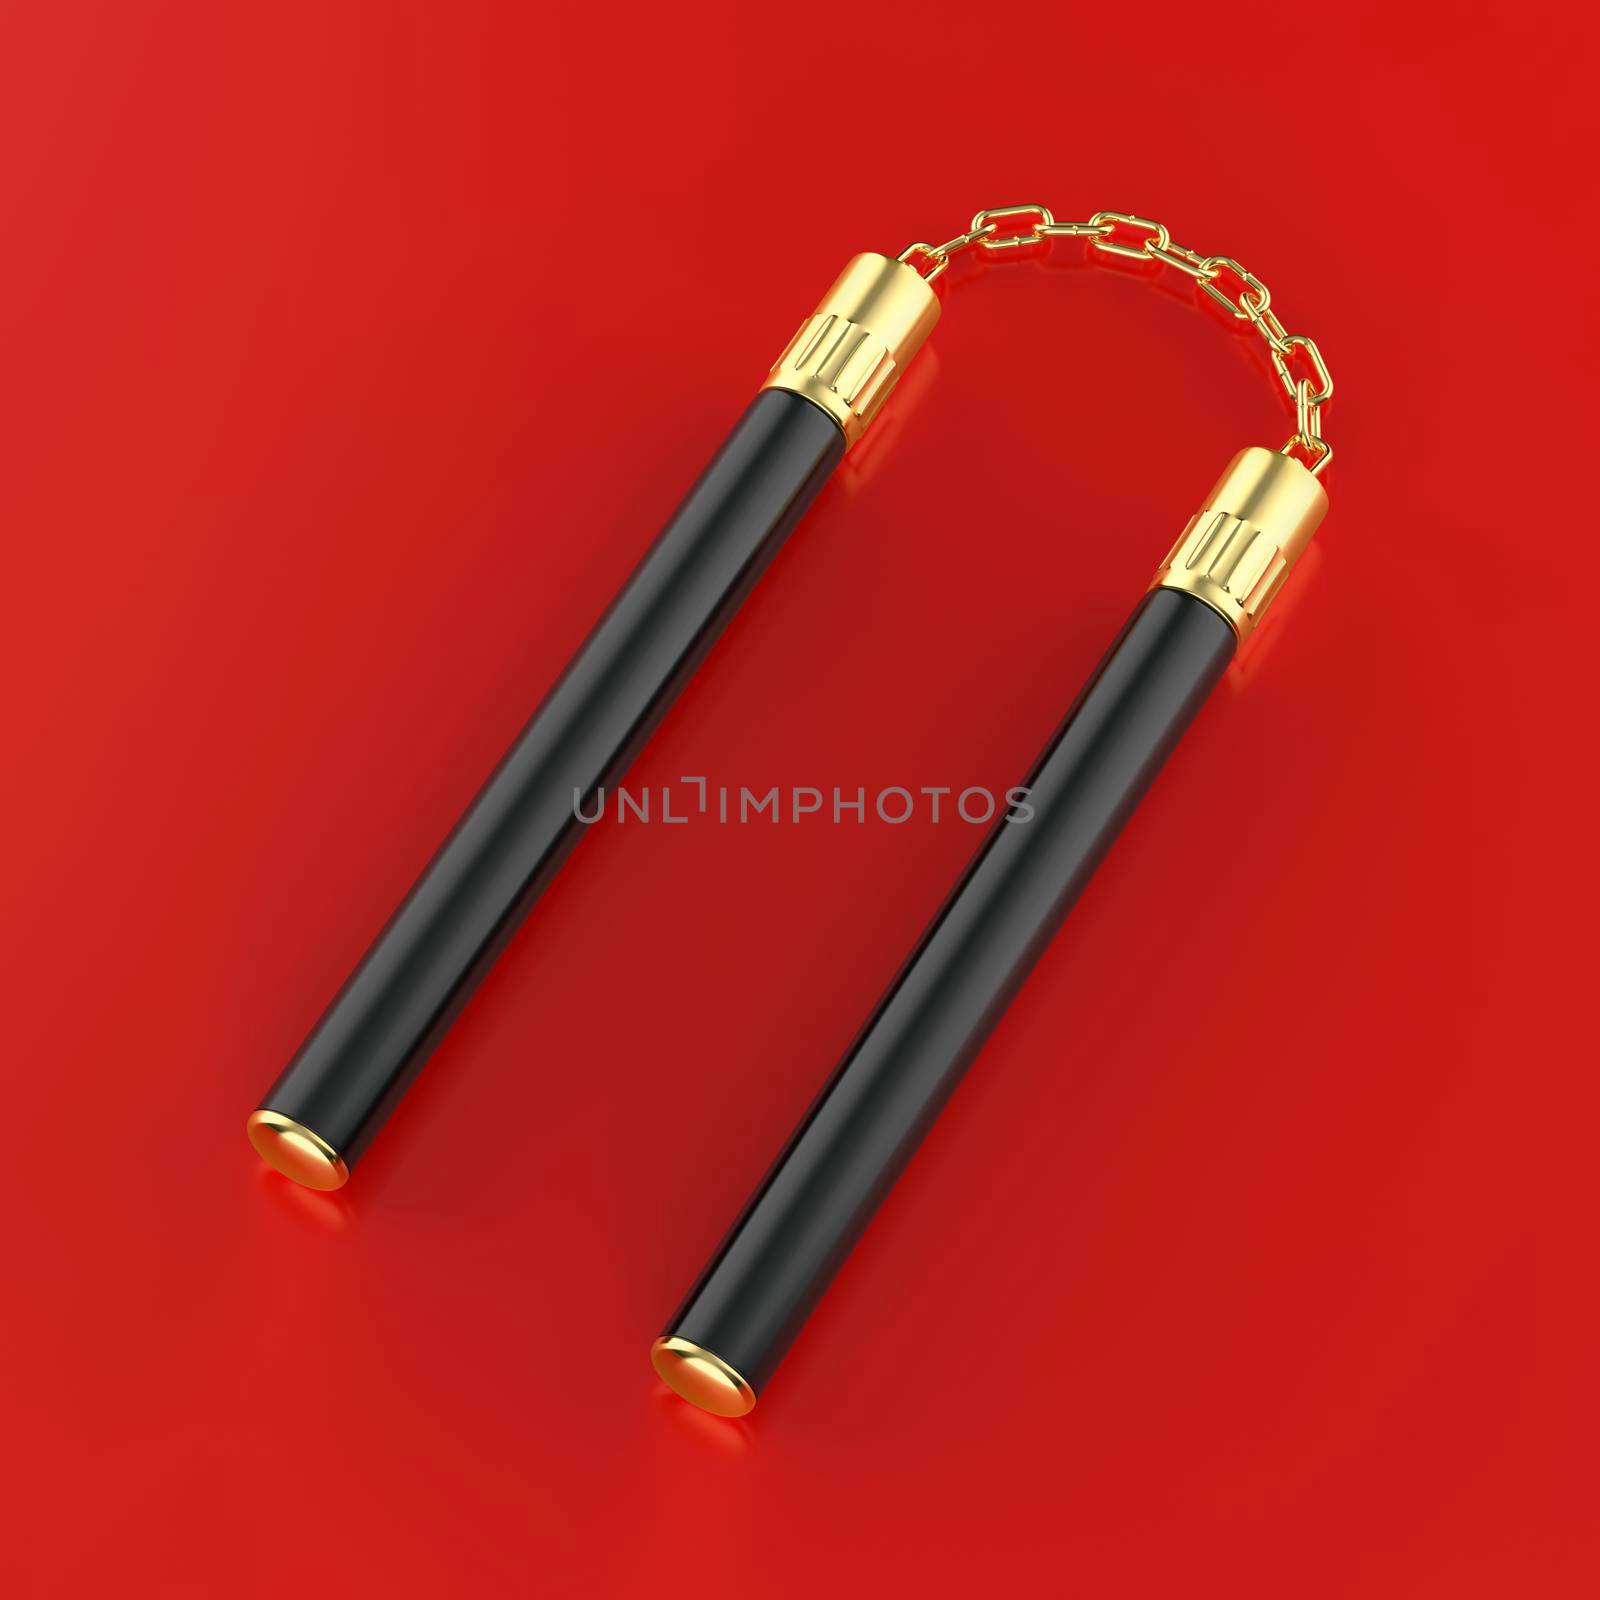 Black nunchaku with gold chain on shiny red background